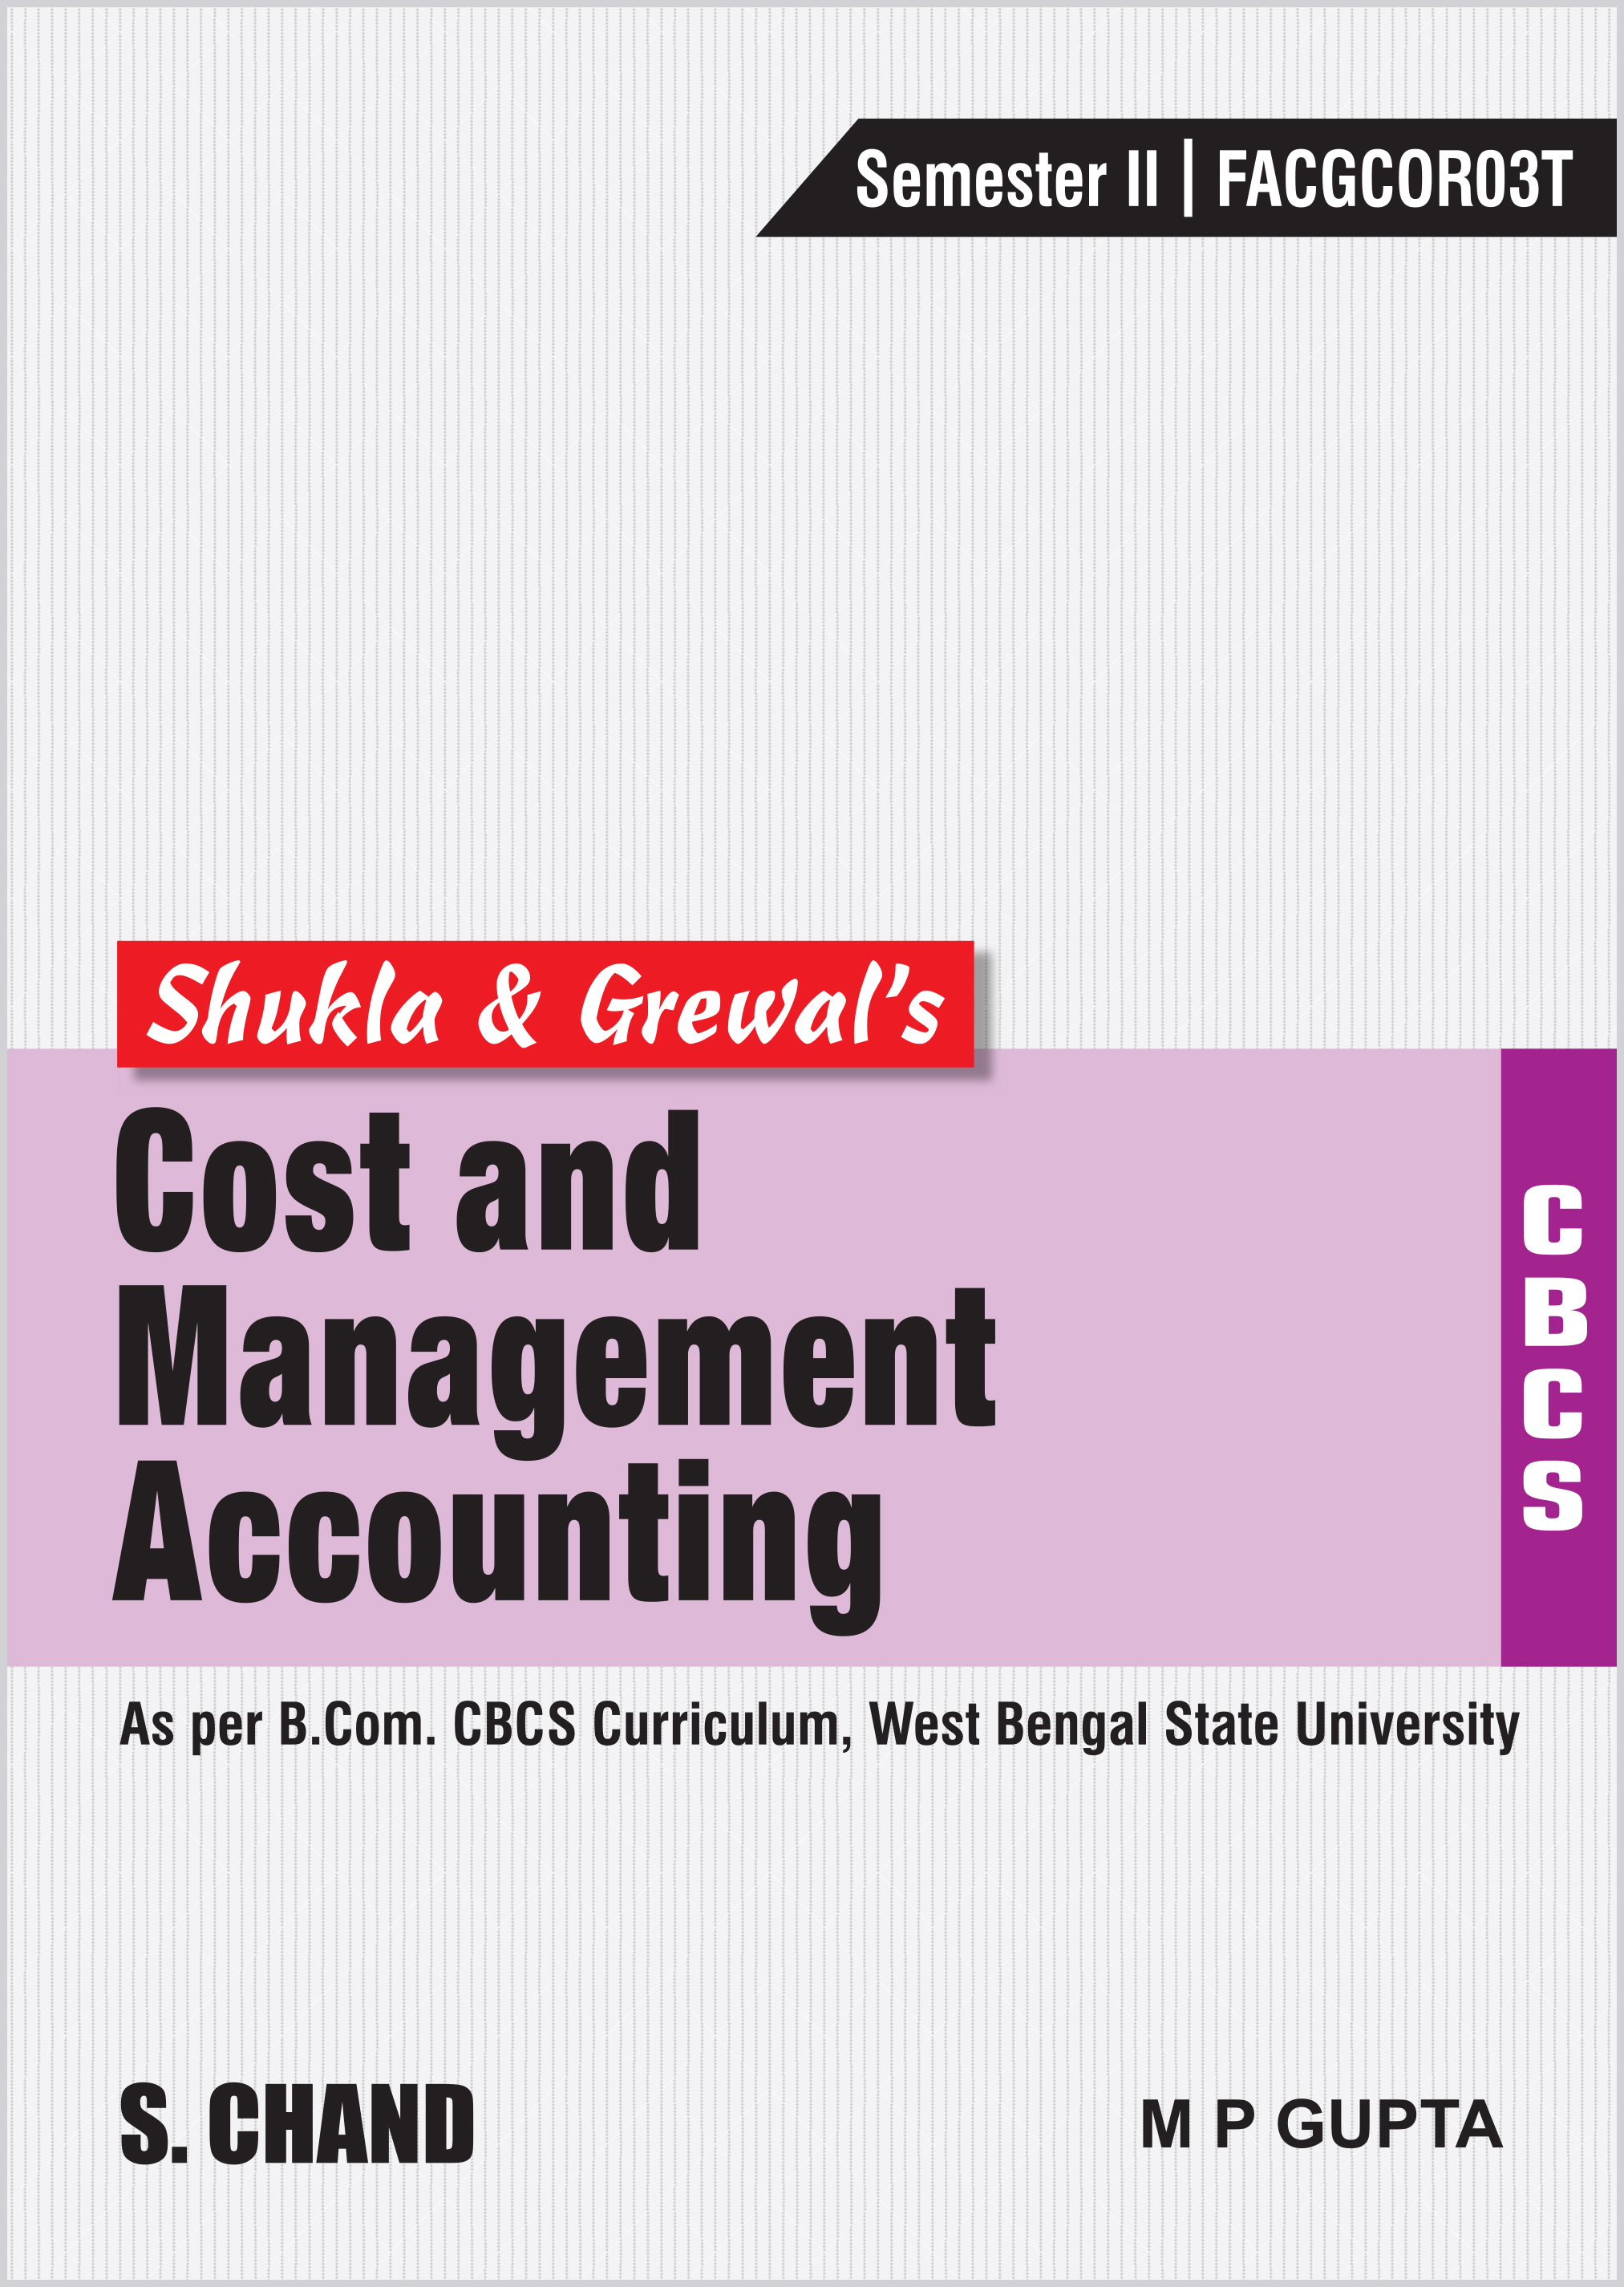 Shukla & Grewal's Cost & Management Accounting (As per B.Com. CBCS Curriculum, Sem.-II of West Bengal State University)